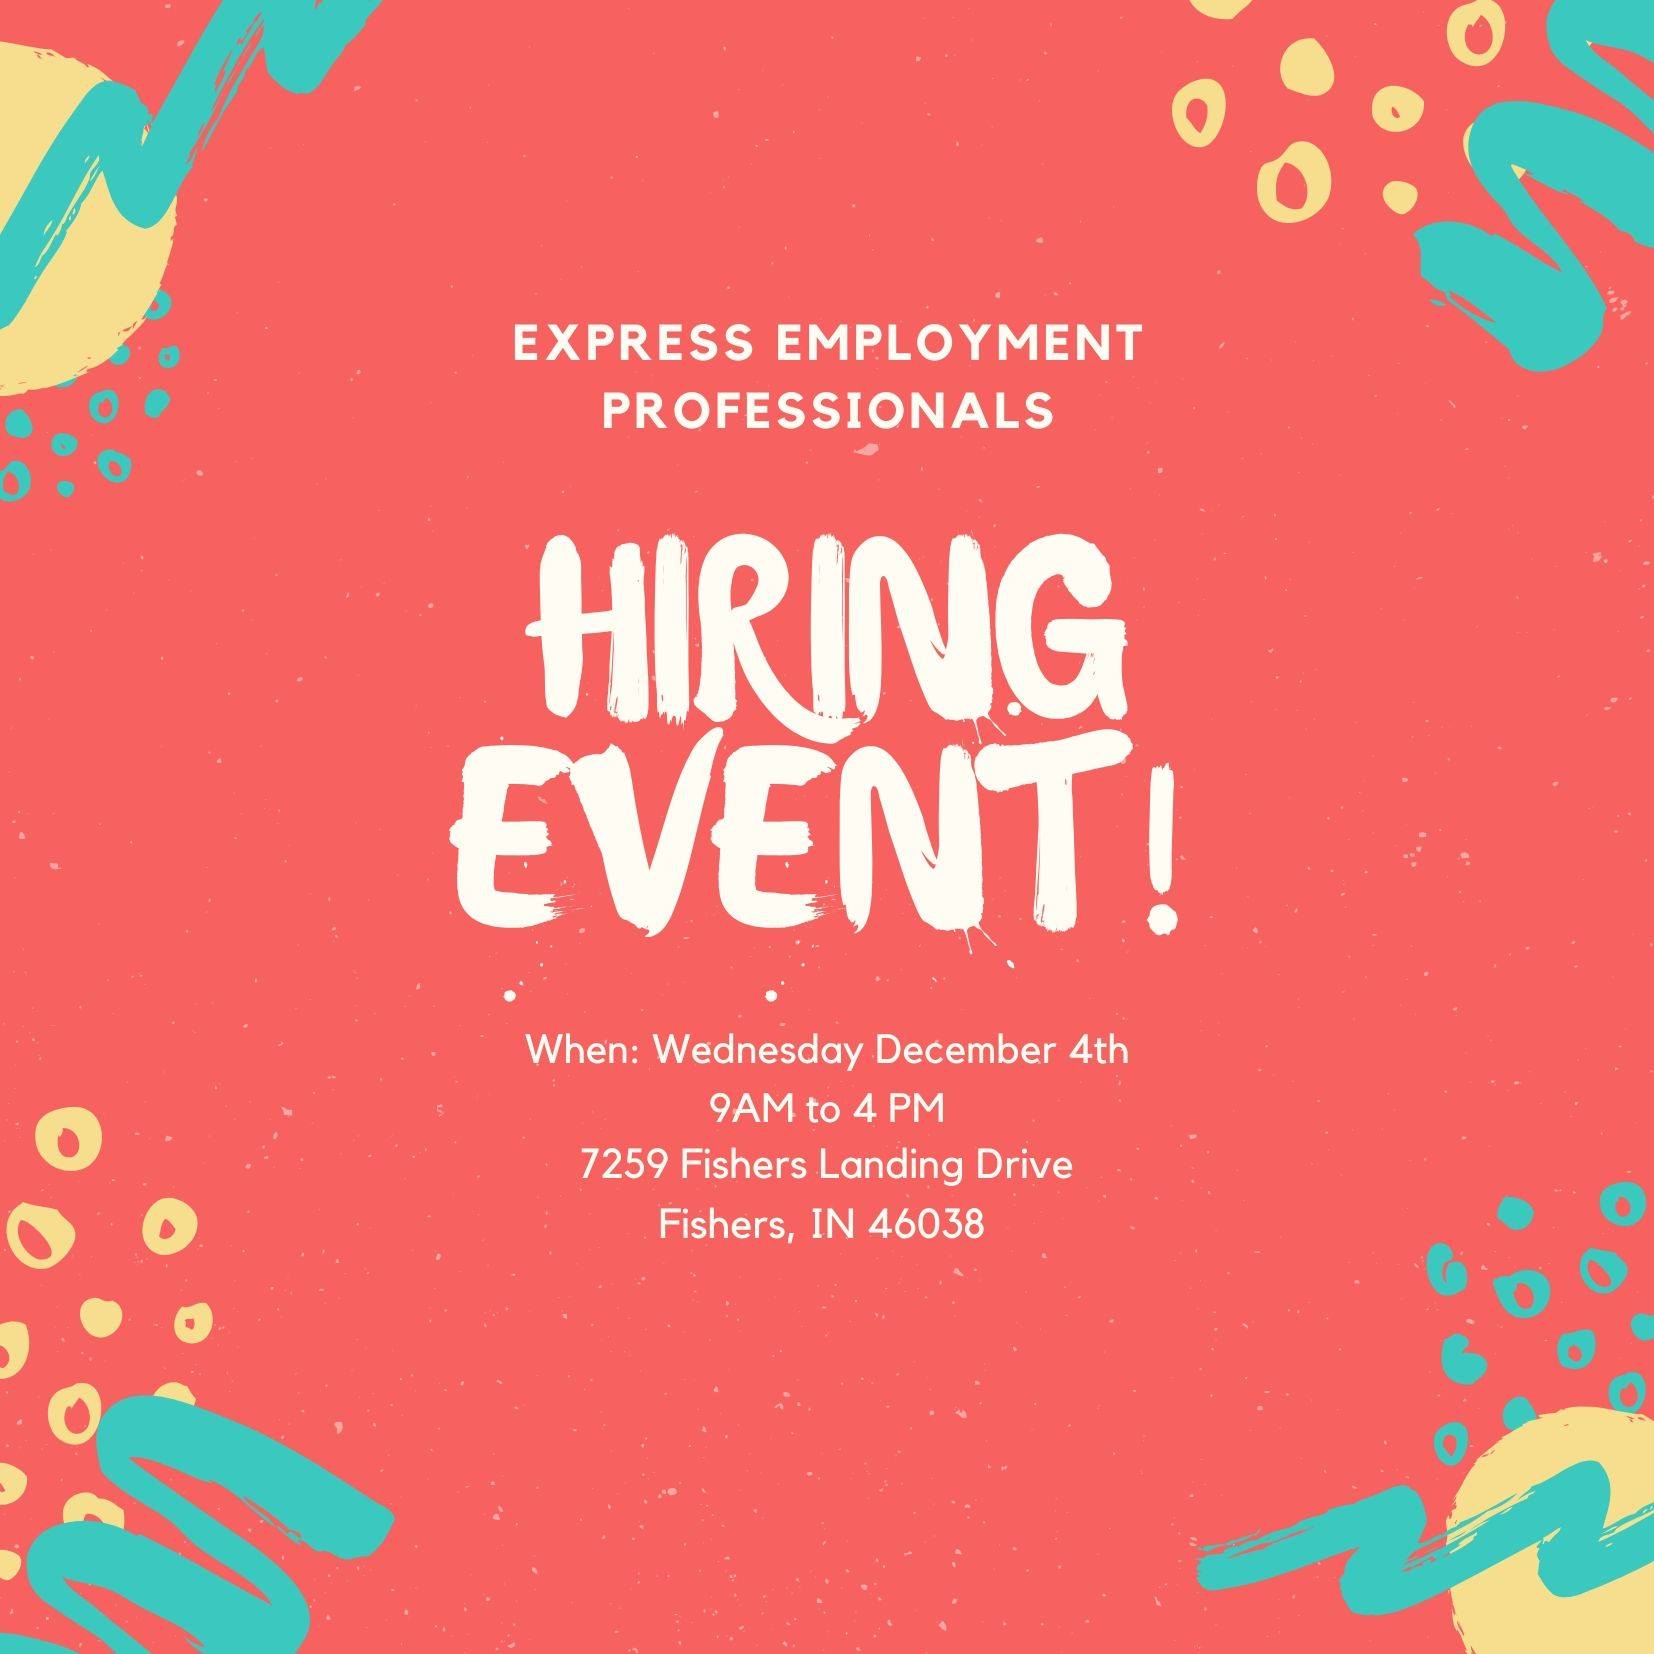 Express Hiring Events in Indianapolis North - Jobs in Fishers